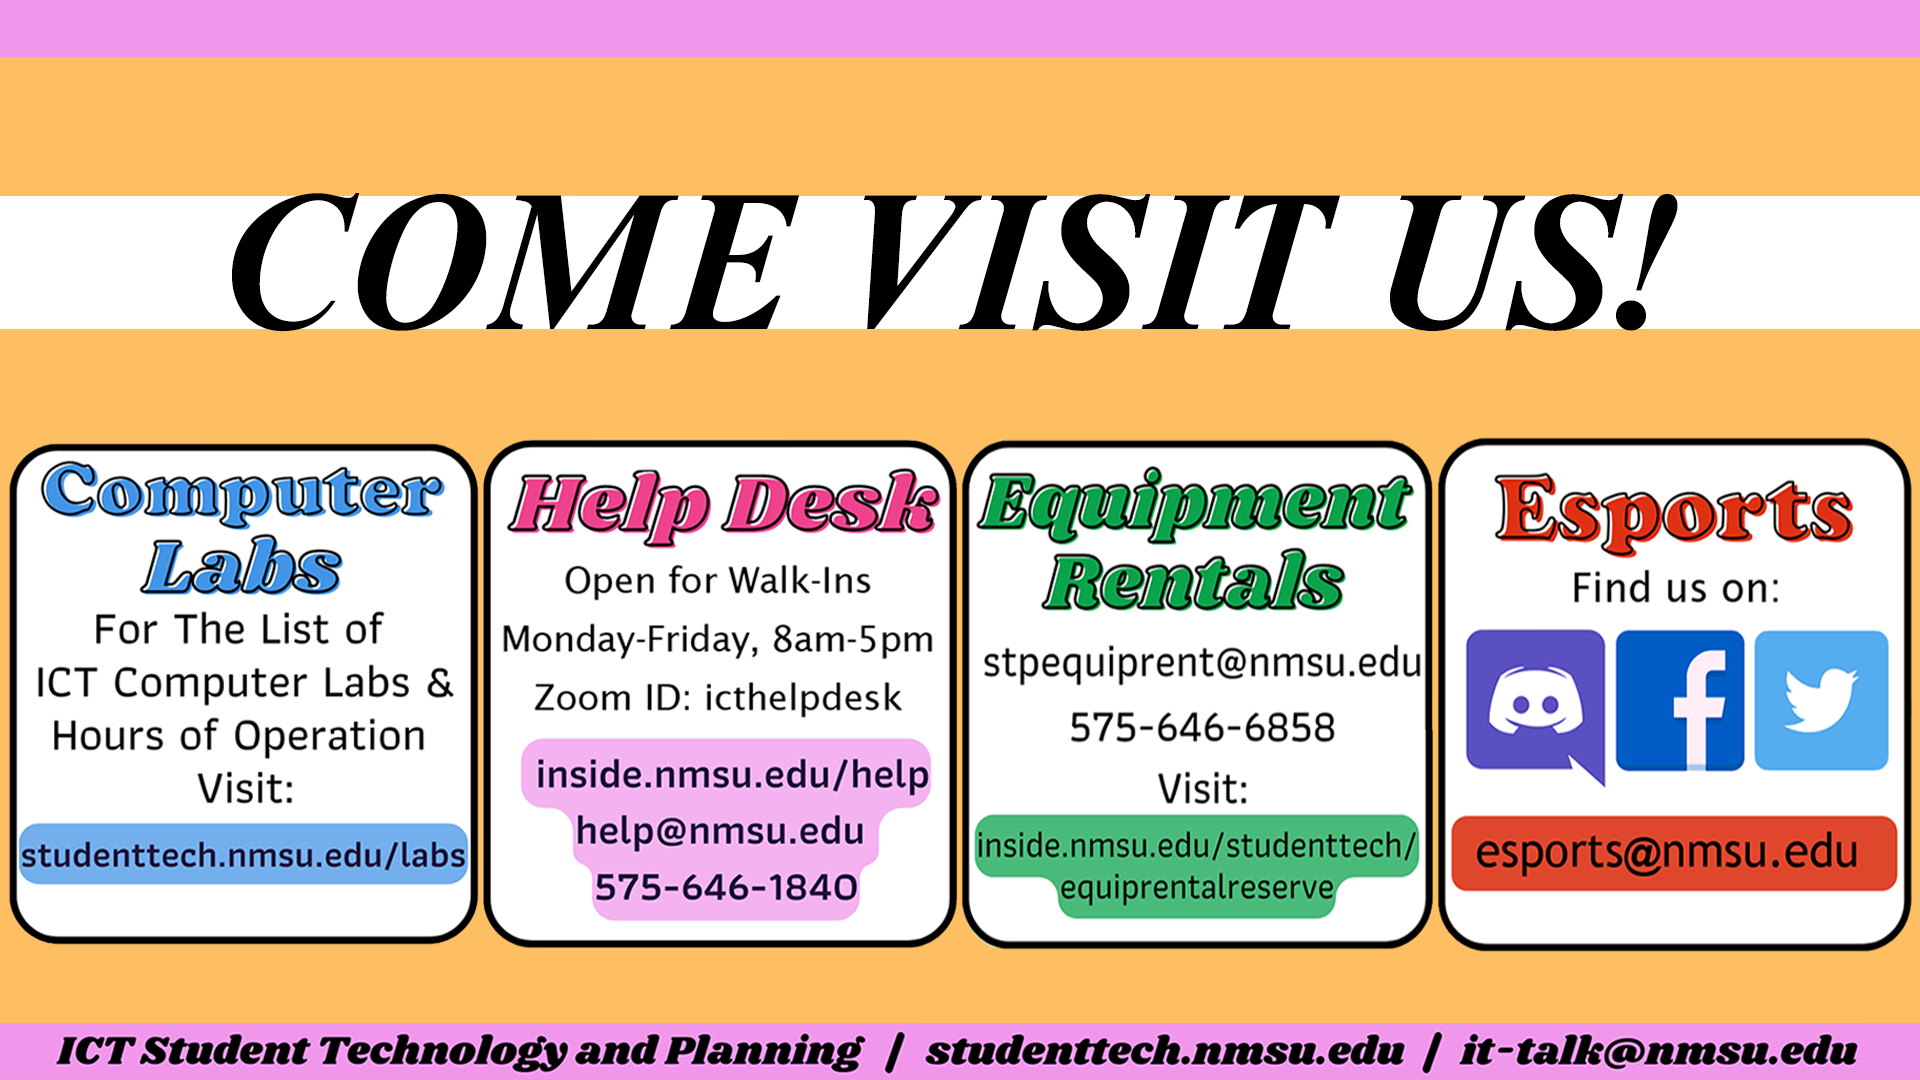 Come visit us! For information on ICT Computer Labs, the ICT Help Desk, Equipment Rentals, and Esports, visit studenttech.nmsu.edu/tech-resources.